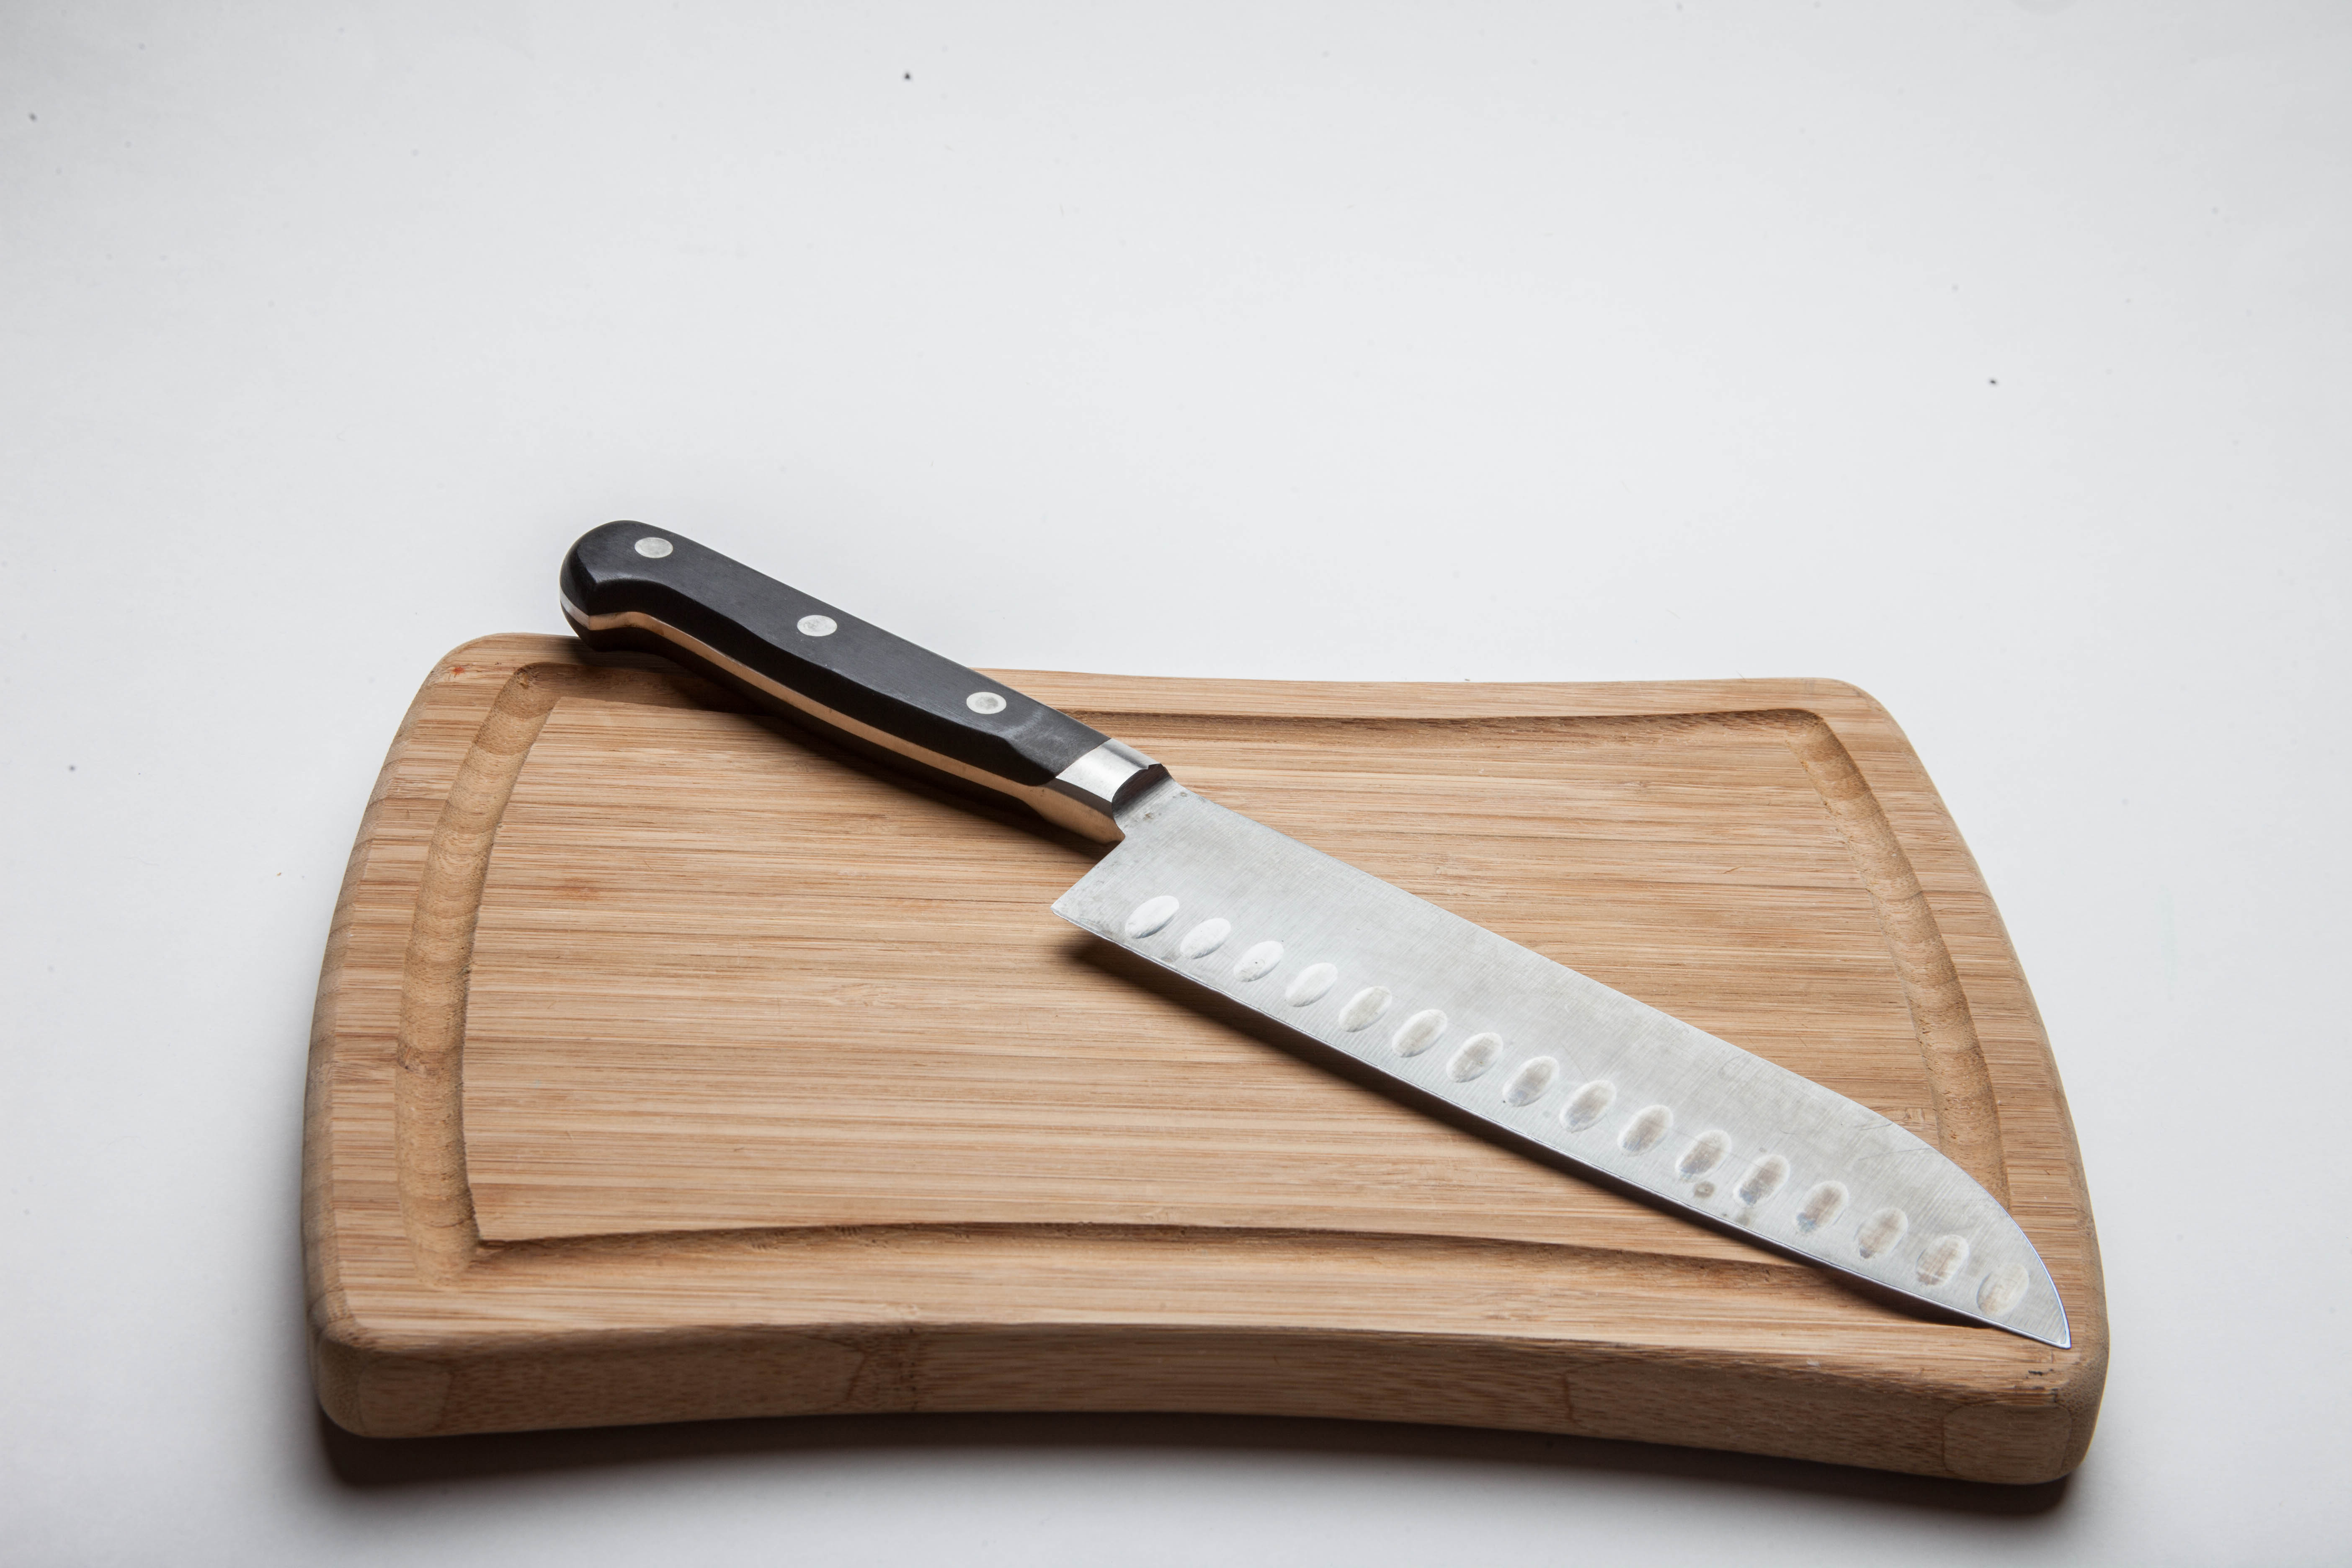 Wooden cutting board with knife, Board, Chop, Cooking, Cutting, HQ Photo